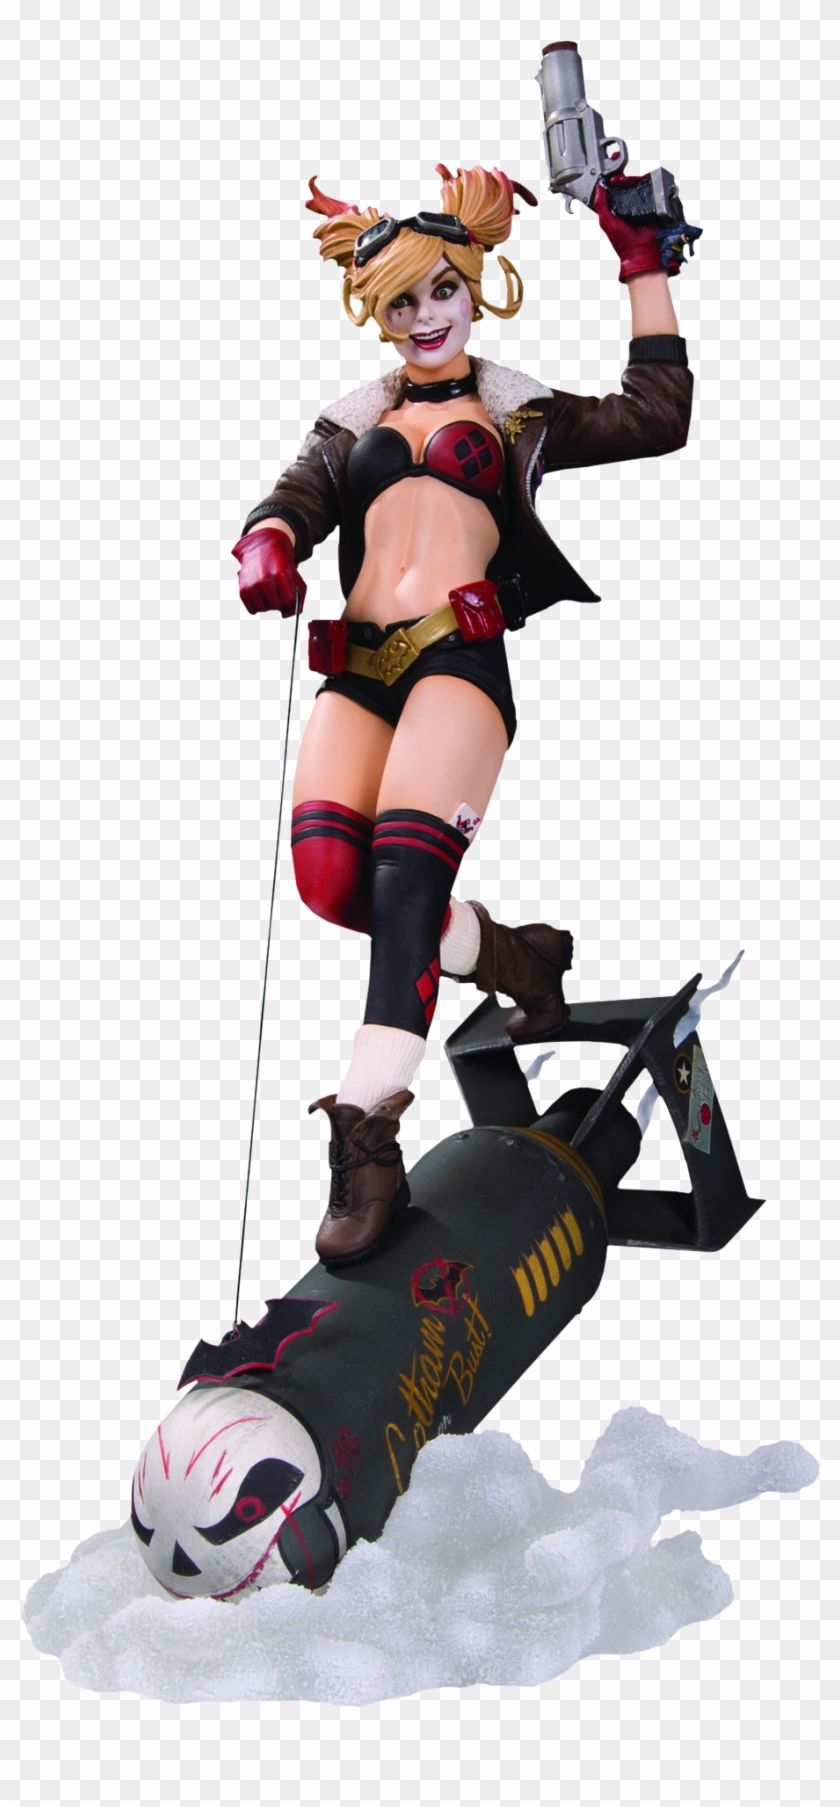 Harley Quinn Dc Bombshells Deluxe 14” Statue By Dc - Bombshells Harley Quinn Deluxe Statue Clipart #5368222